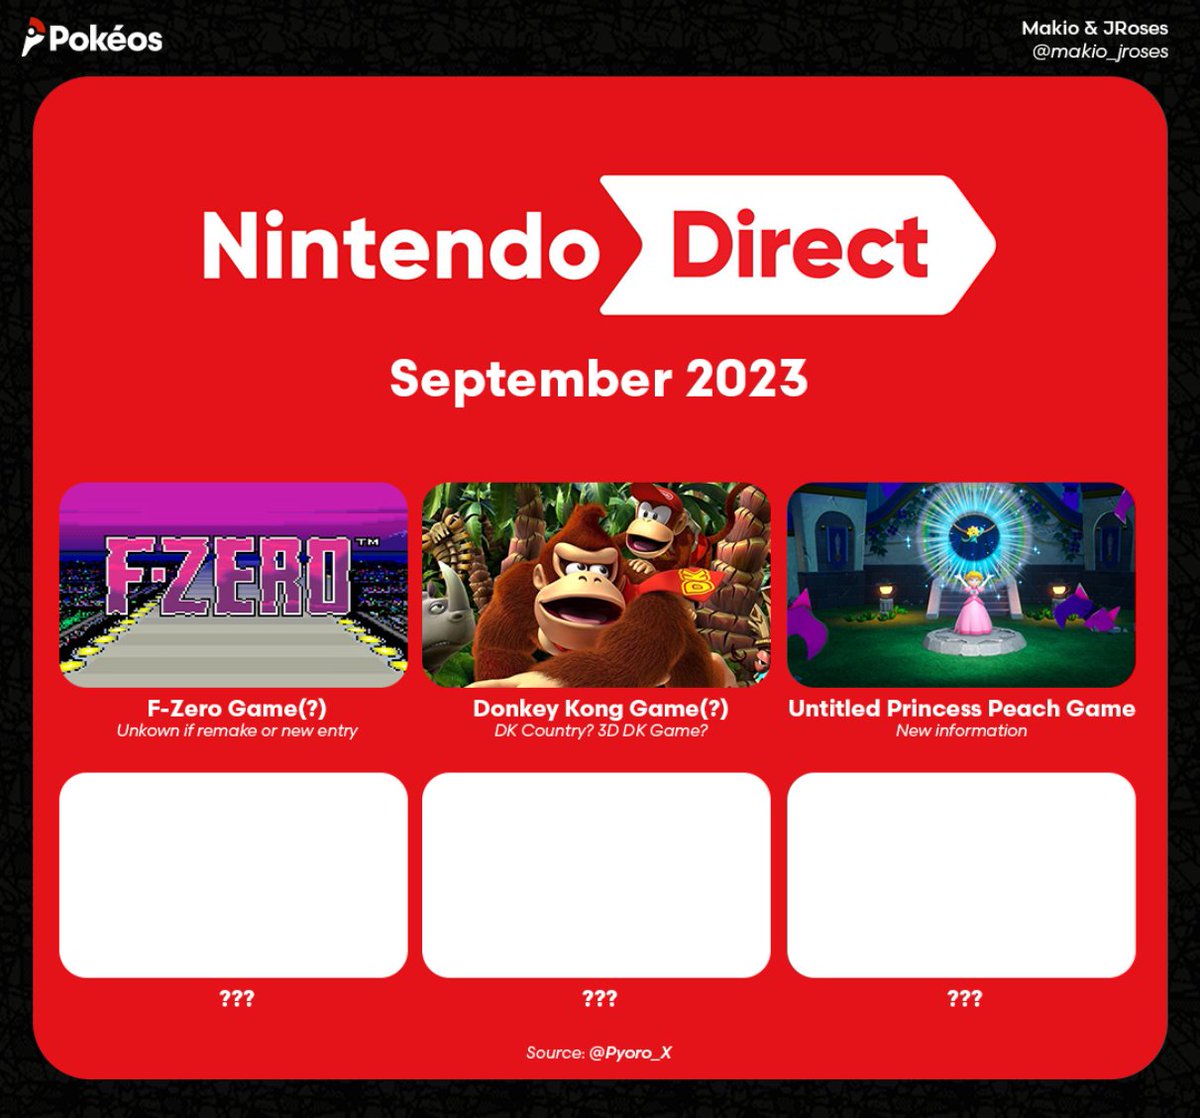 Will there be a Nintendo Direct This September 2023?